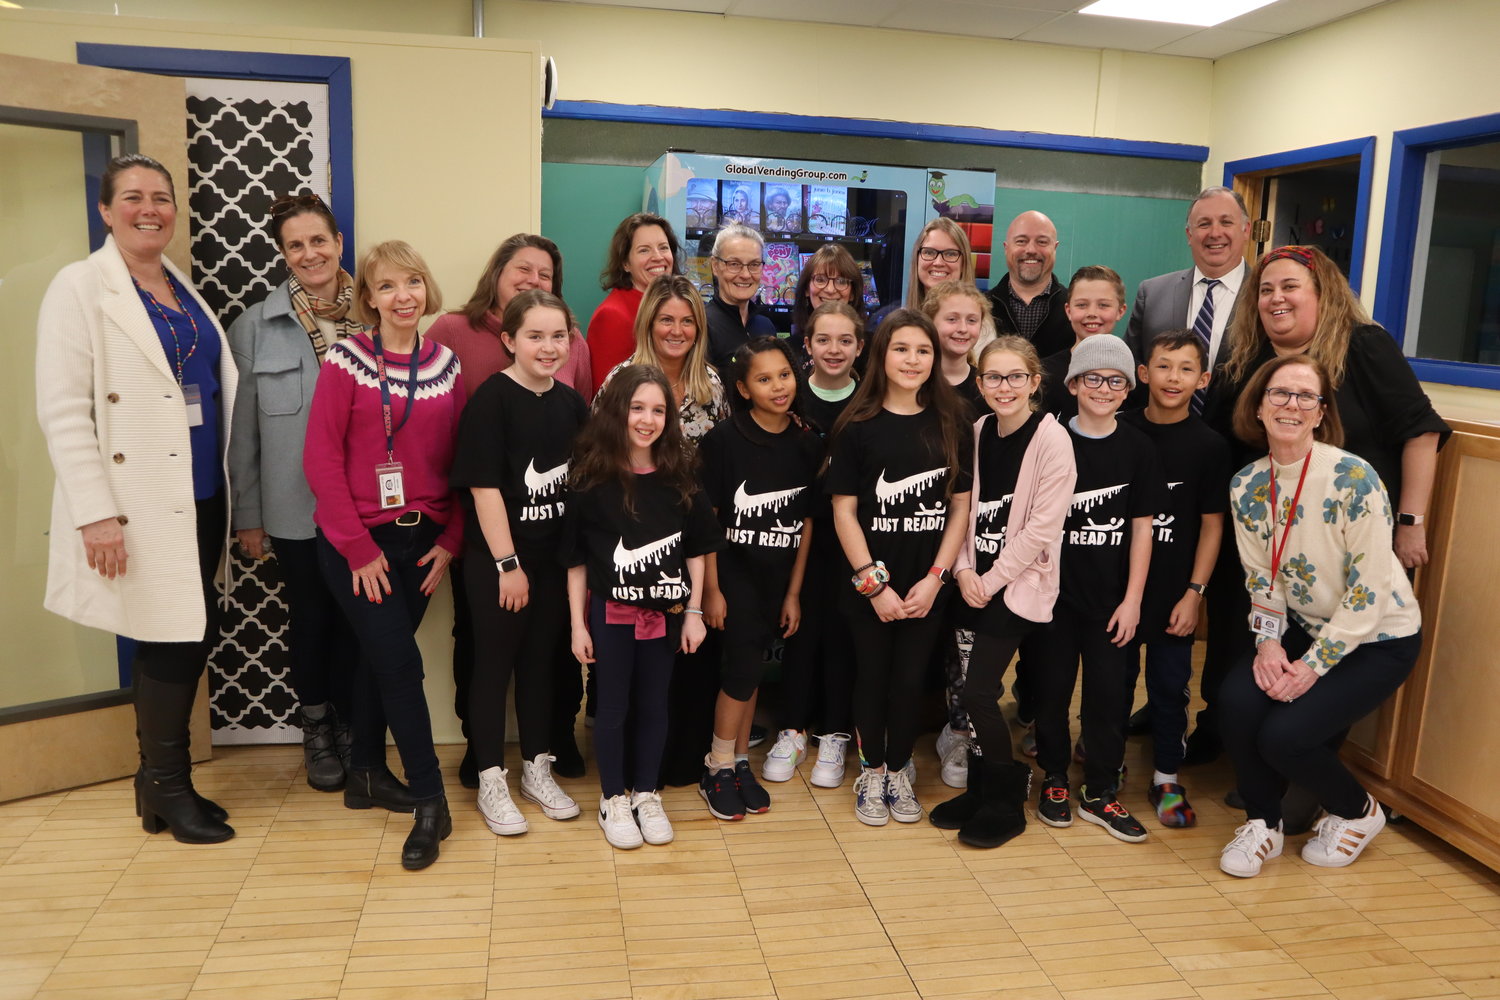 Fifth grade students Meghan Walsh, Annie Reilly, Abigail Mann, Izzy Fuentes, Ben Yin, Henry Larom, Emma Ferrari, Sophia Turk, Maggie O’Keefe, and Hudson Farish join Rockville Centre school district officials and partners with the RVC Education Foundation to present the new book vending machine, located at the back of the Watson Elementary School library.